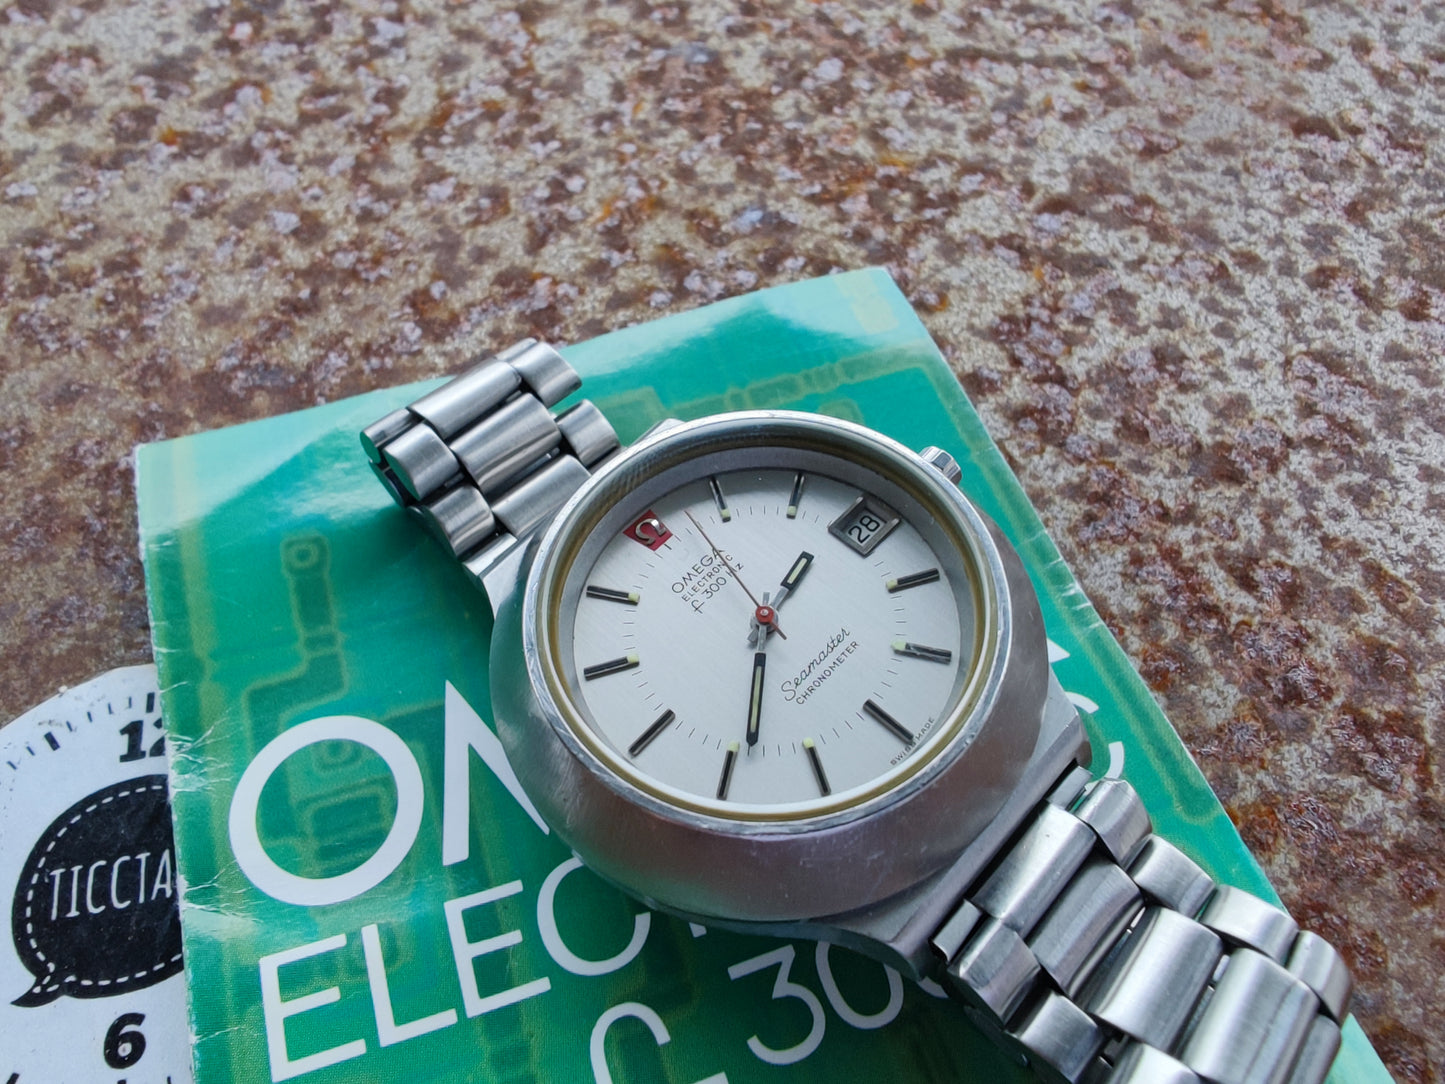 Amazing silver dial OMEGA Seamaster f300 "The Cone" & manual